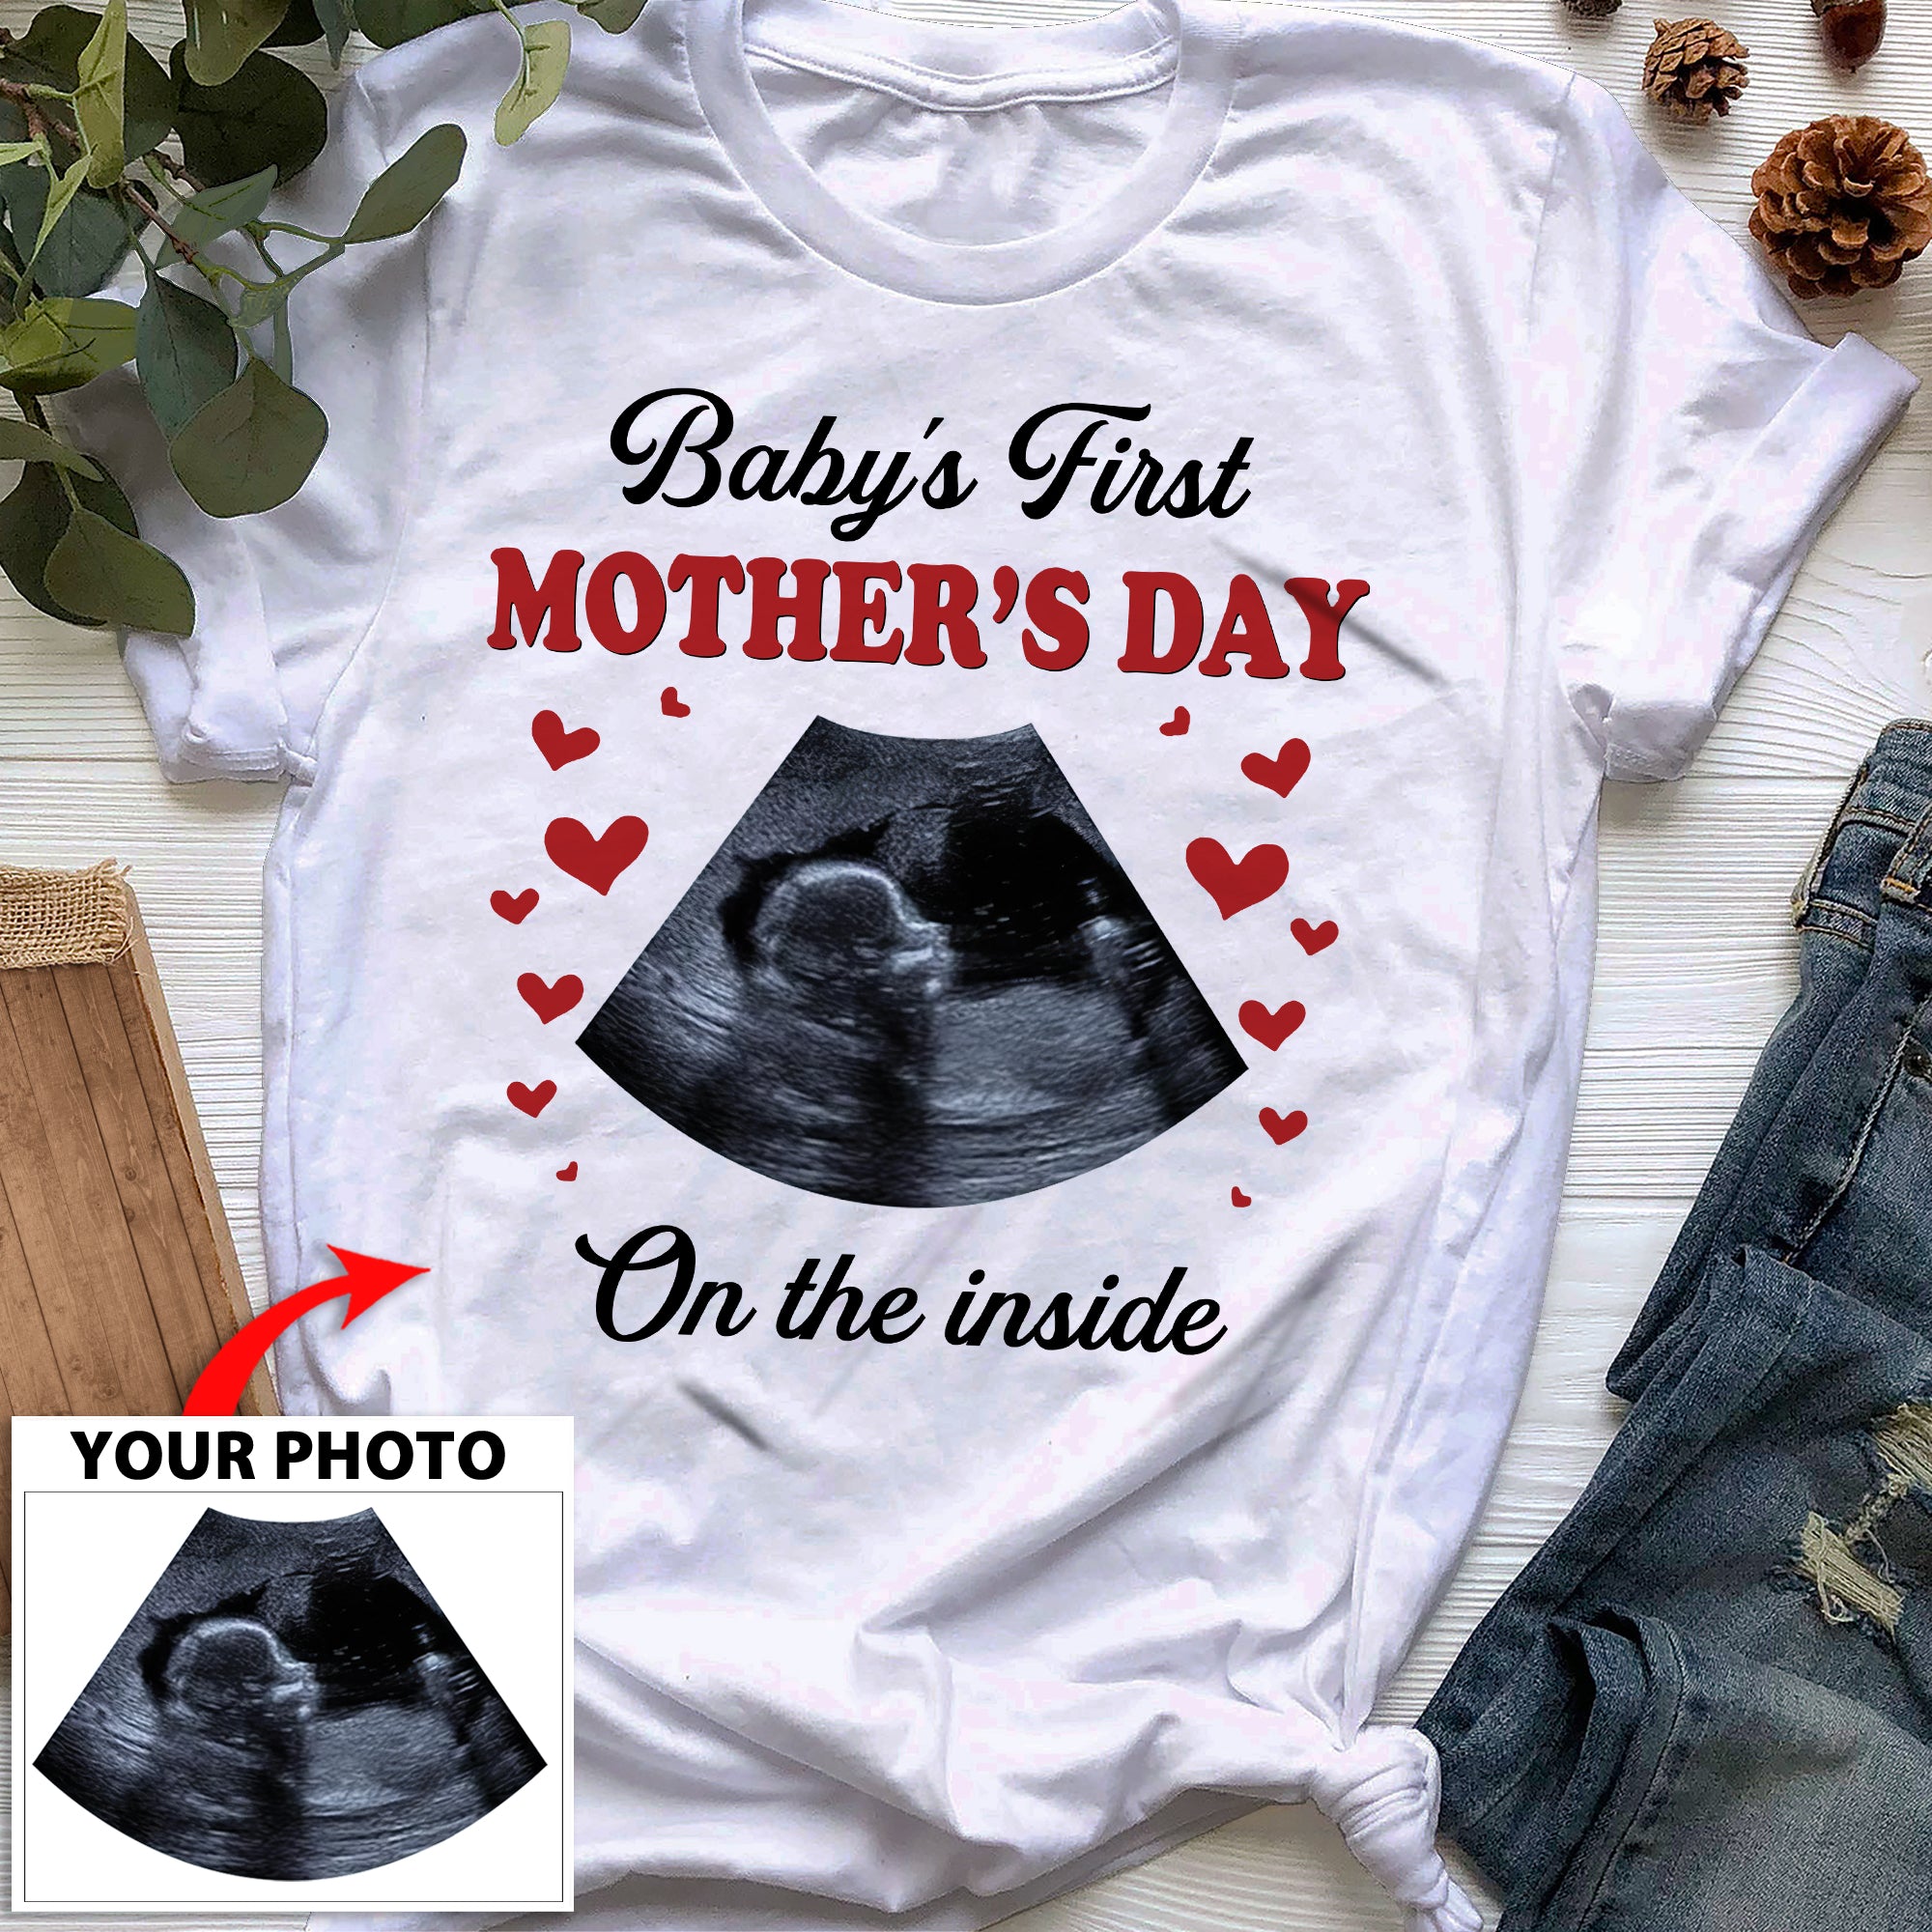 Baby's First Mother's Day on the inside T-SHIRT